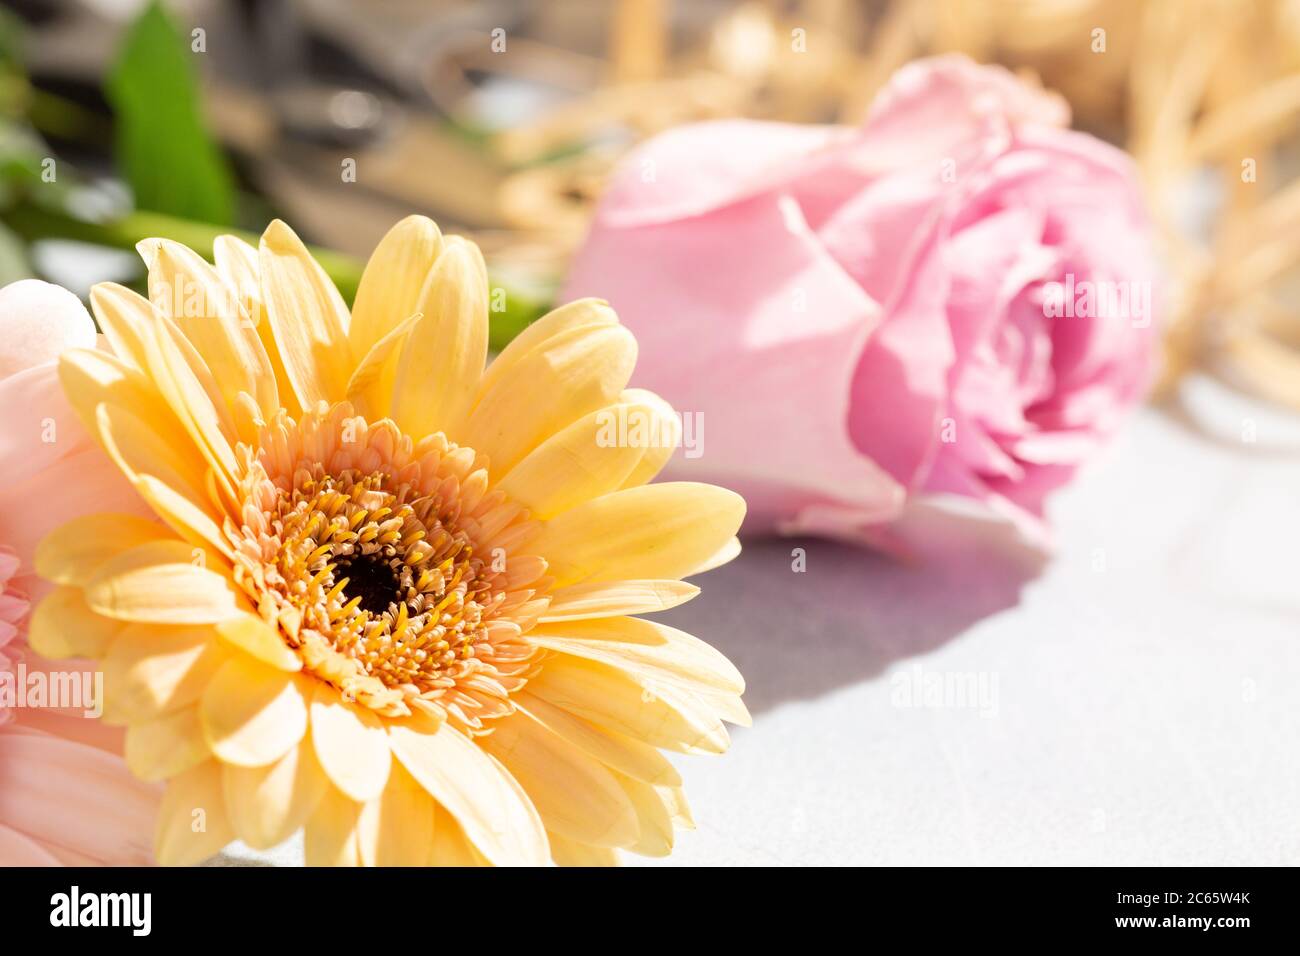 Cut Flower Close Up with Pink Rose and Daisy Stock Photo